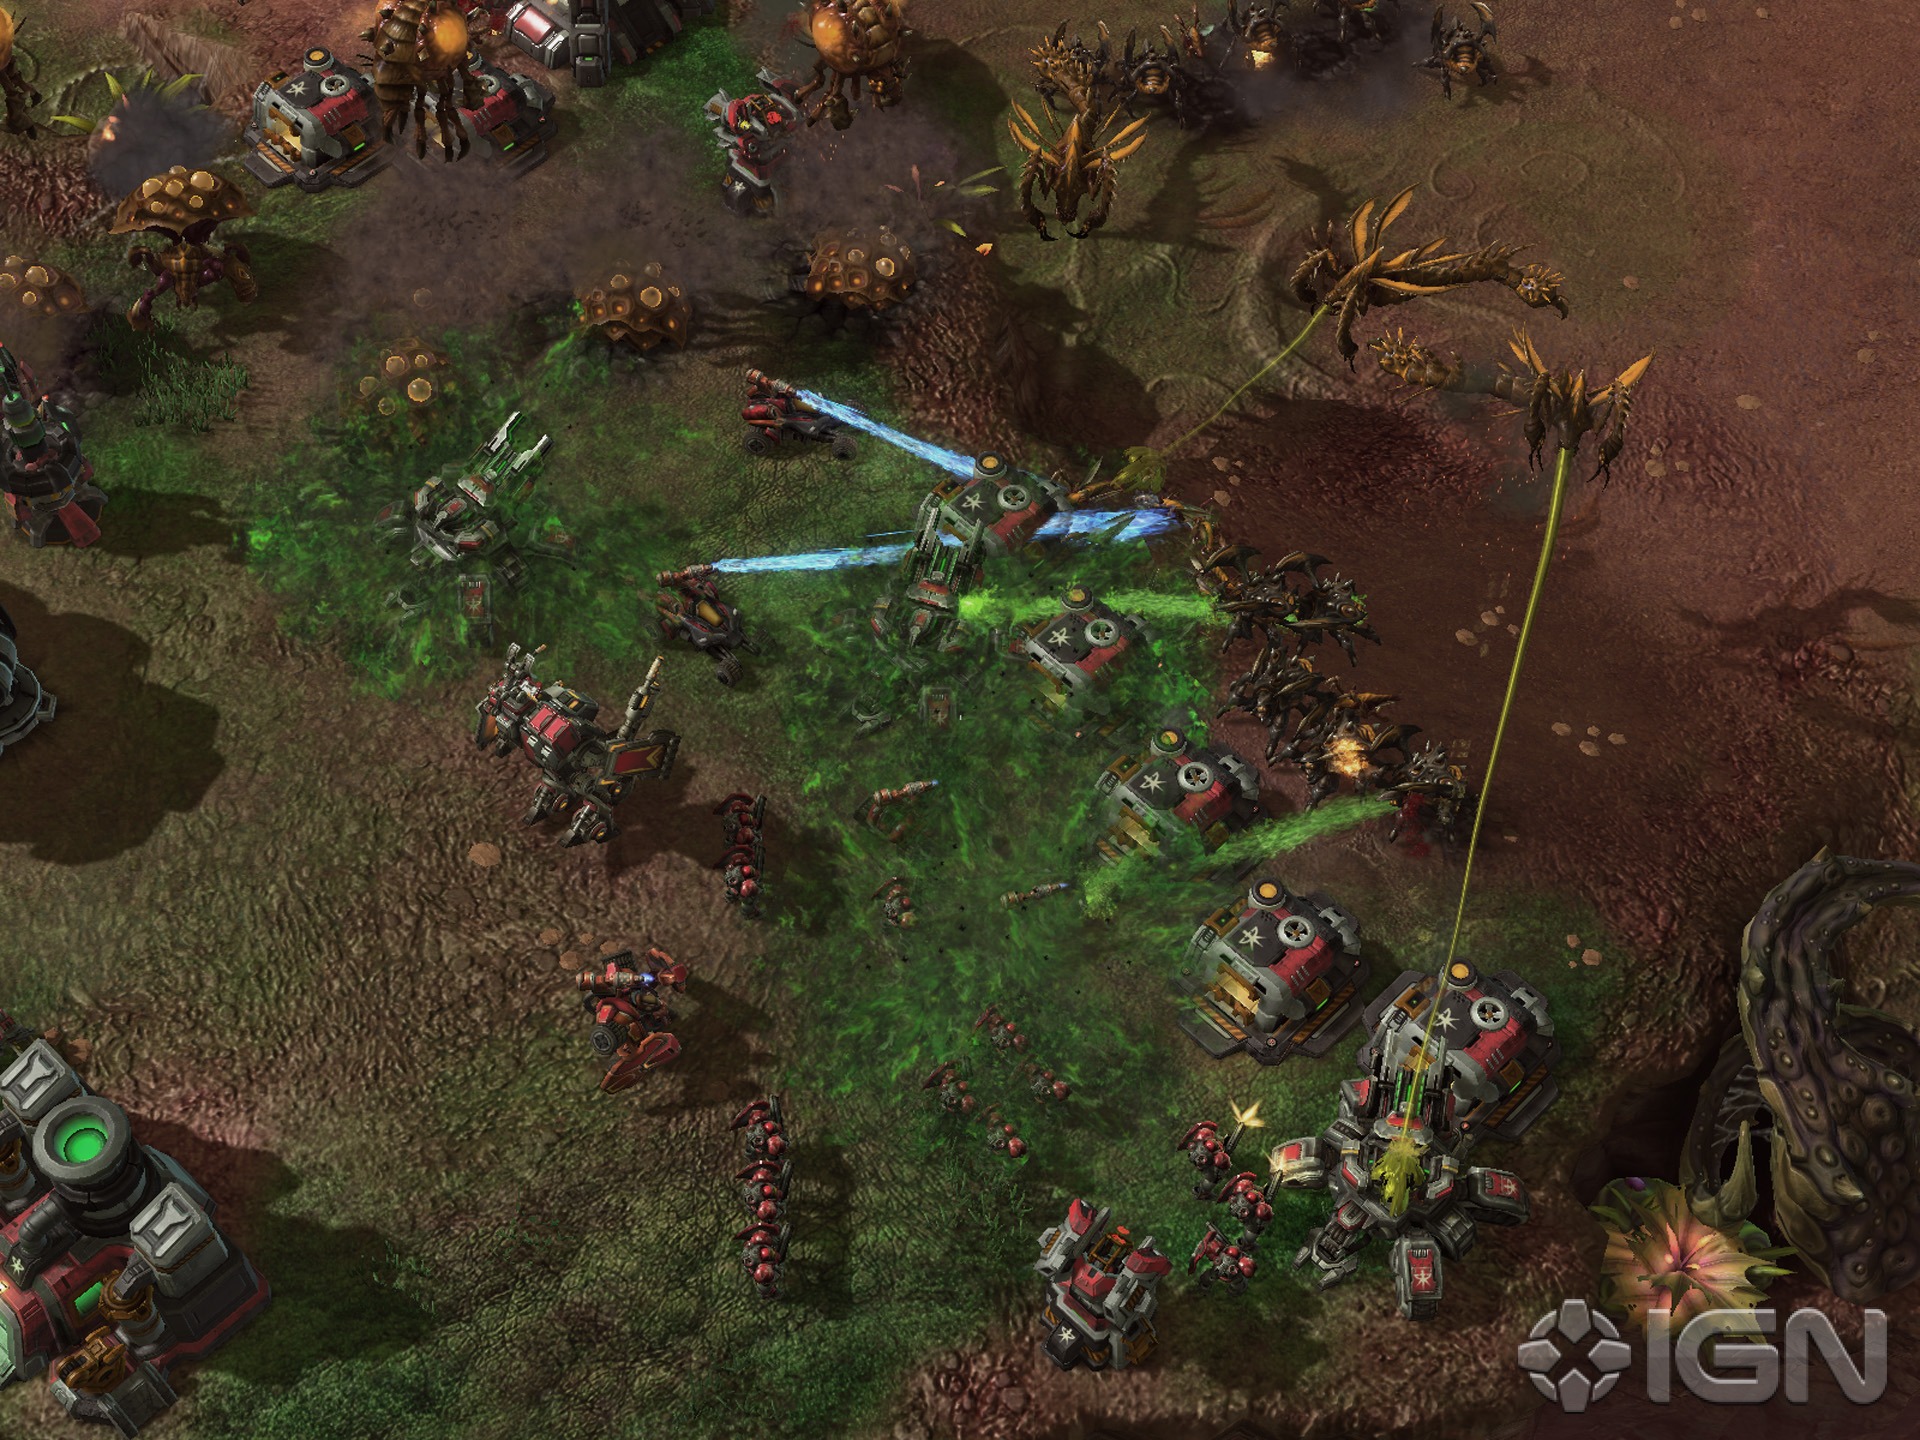 Video Game StarCraft II: Heart of the Swarm HD Wallpaper | Background Image